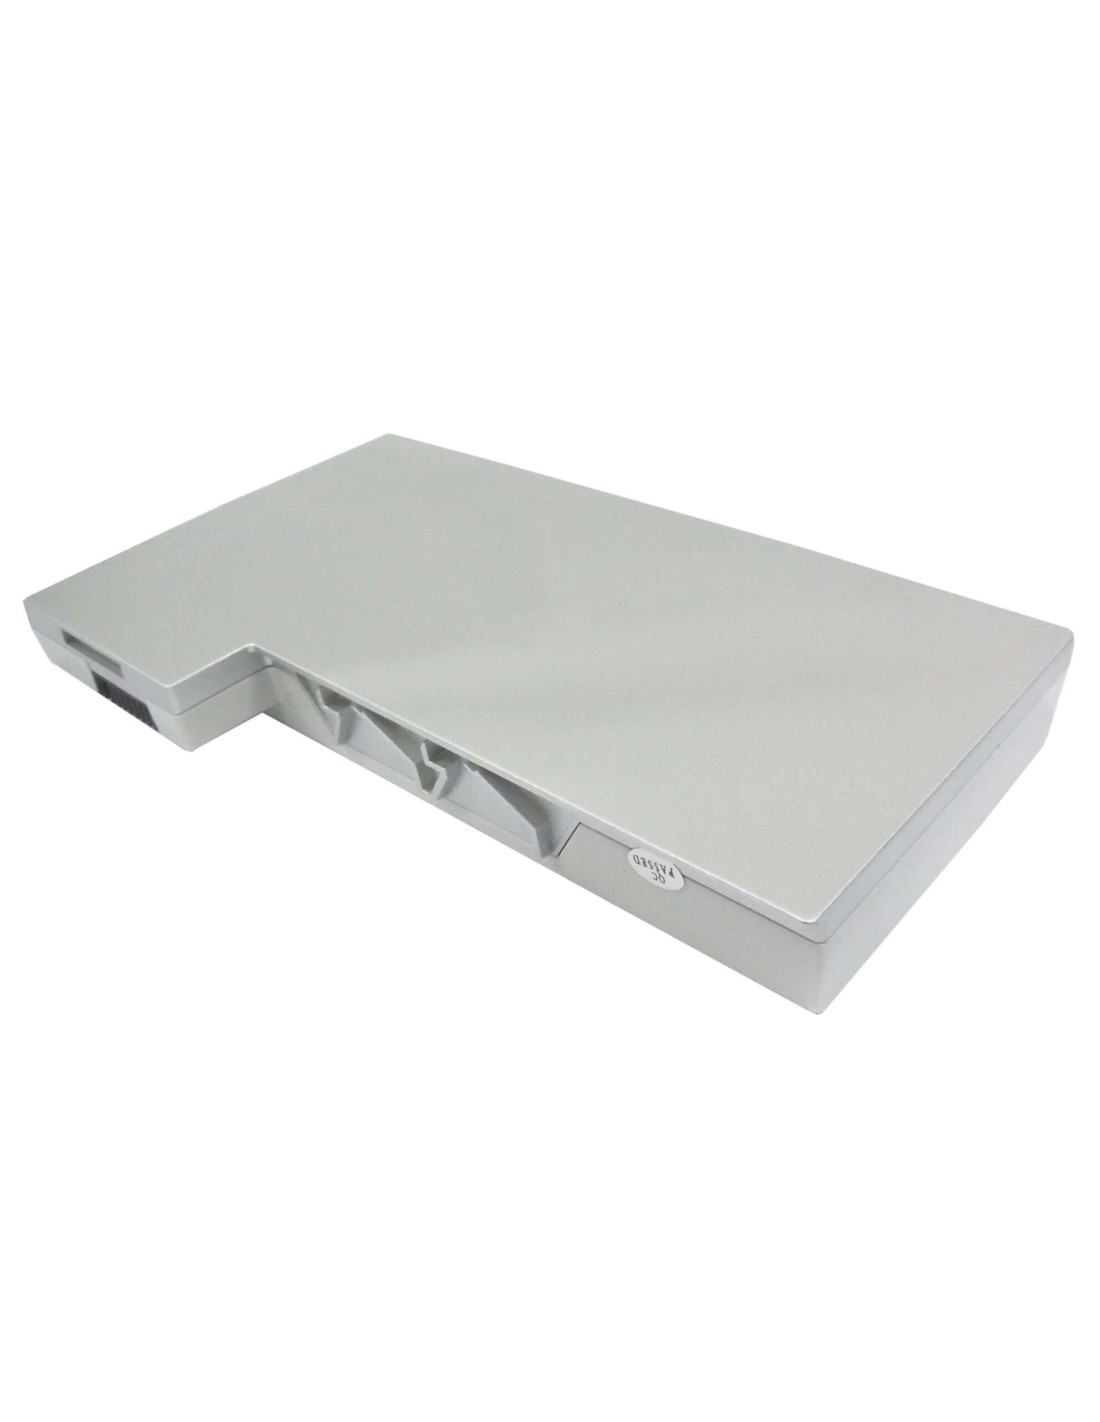 Silver Battery for Fic A3, A360, A380 14.8V, 4400mAh - 65.12Wh